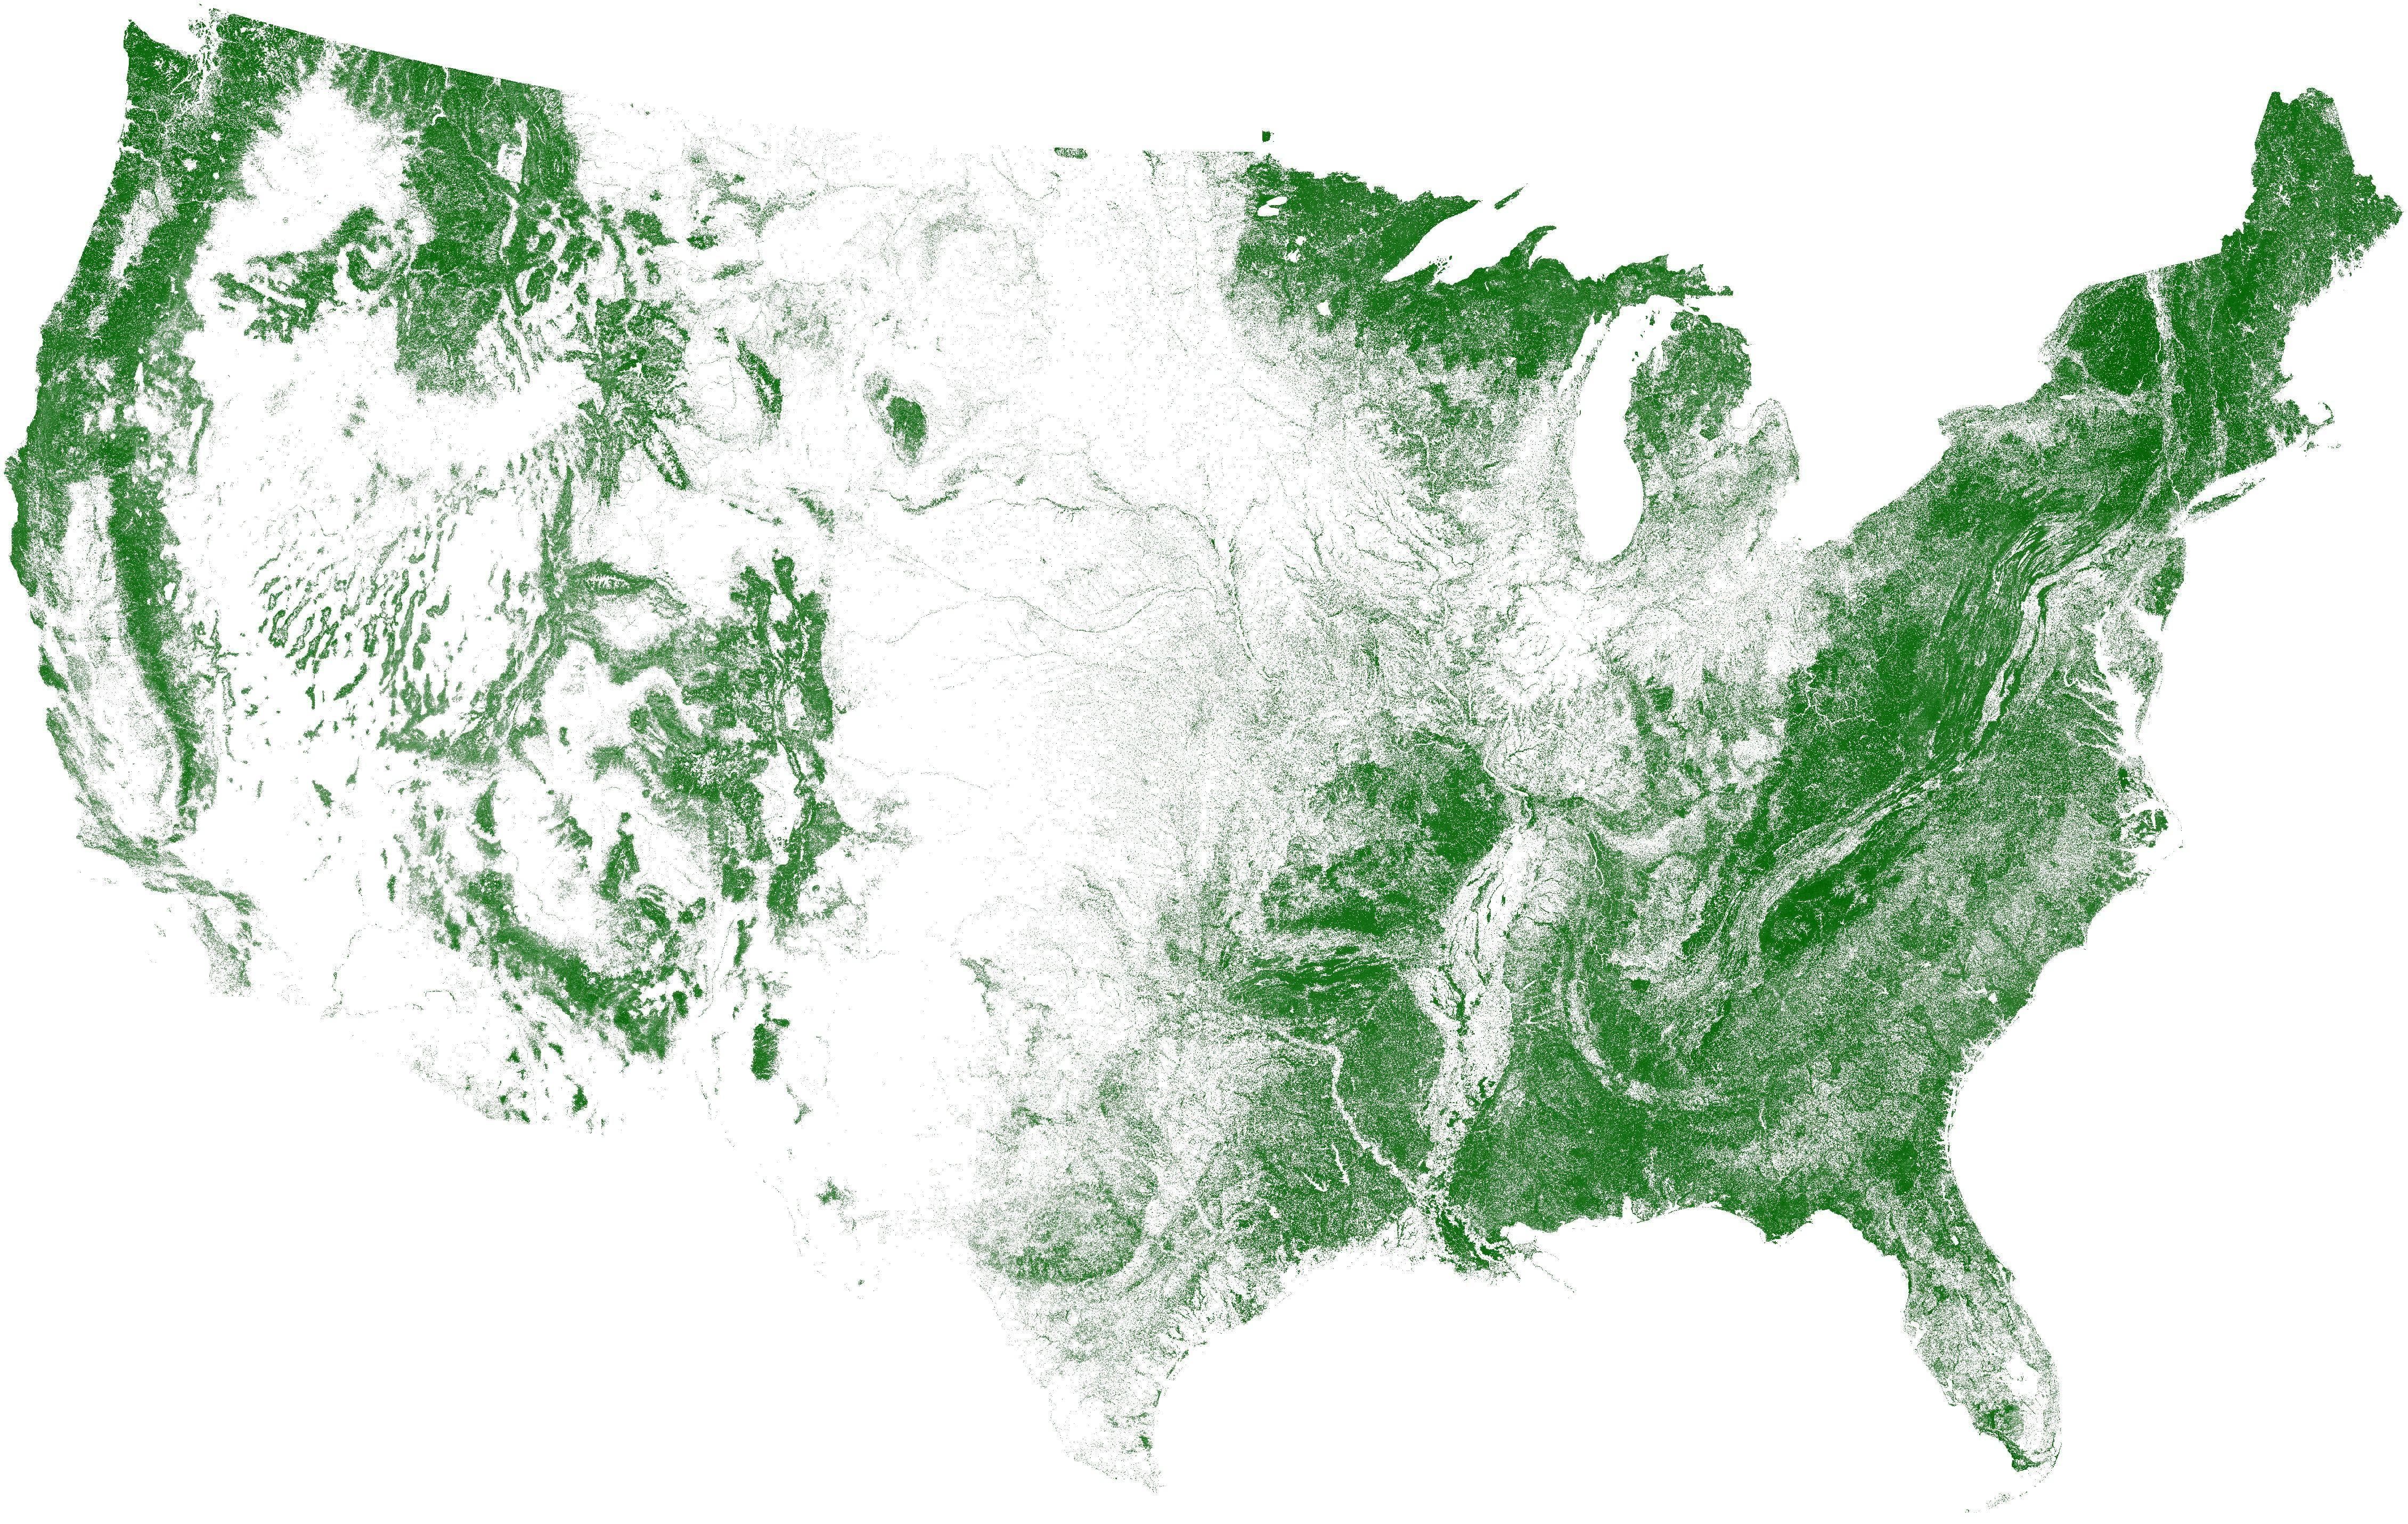 Random Maps Of The United States That Made Us Say 'Whoa'